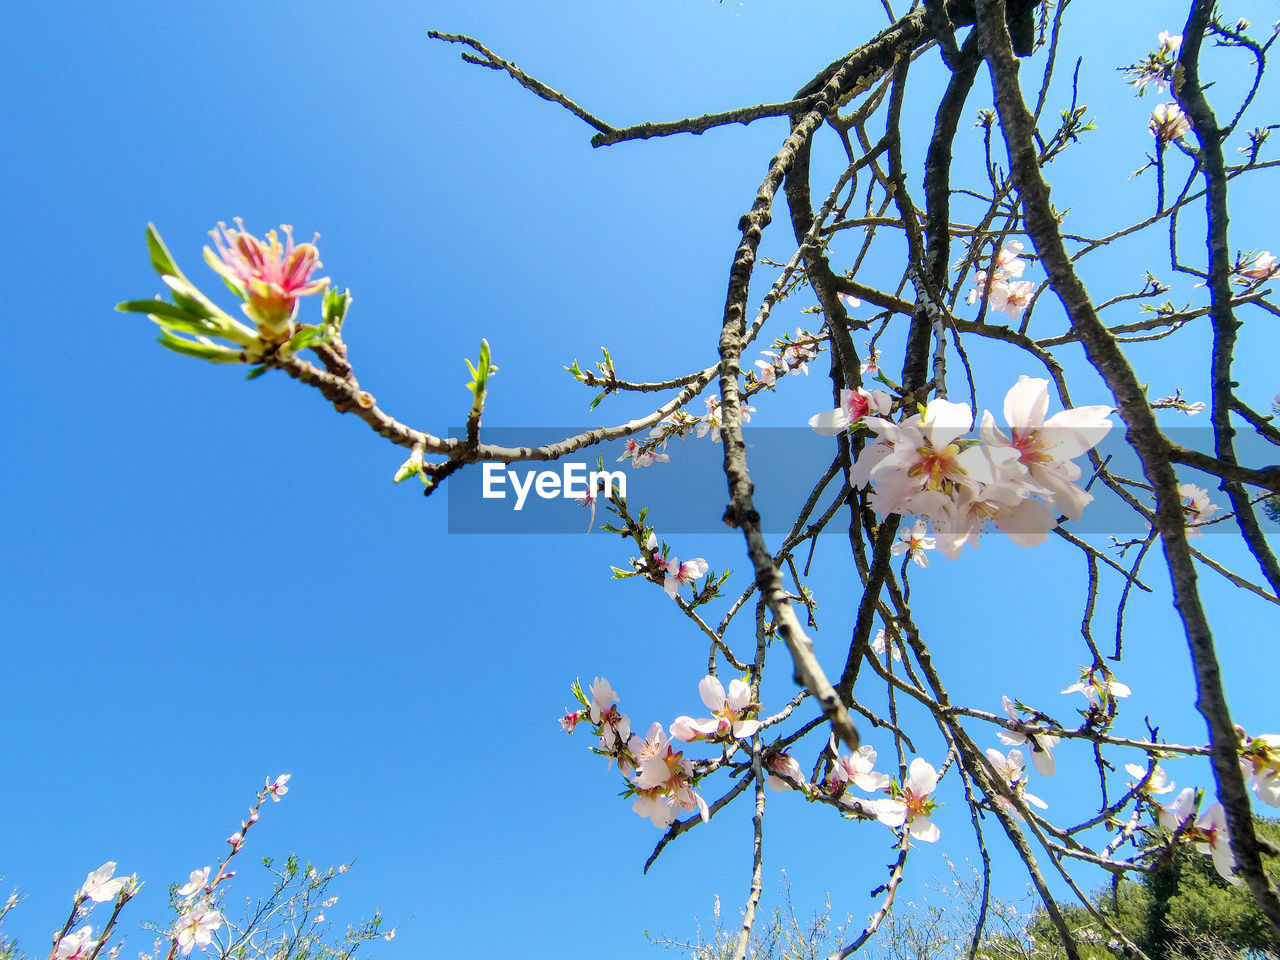 Close up photo of almond tree flowers blossoming in spring with blue sky. in madrid, spain